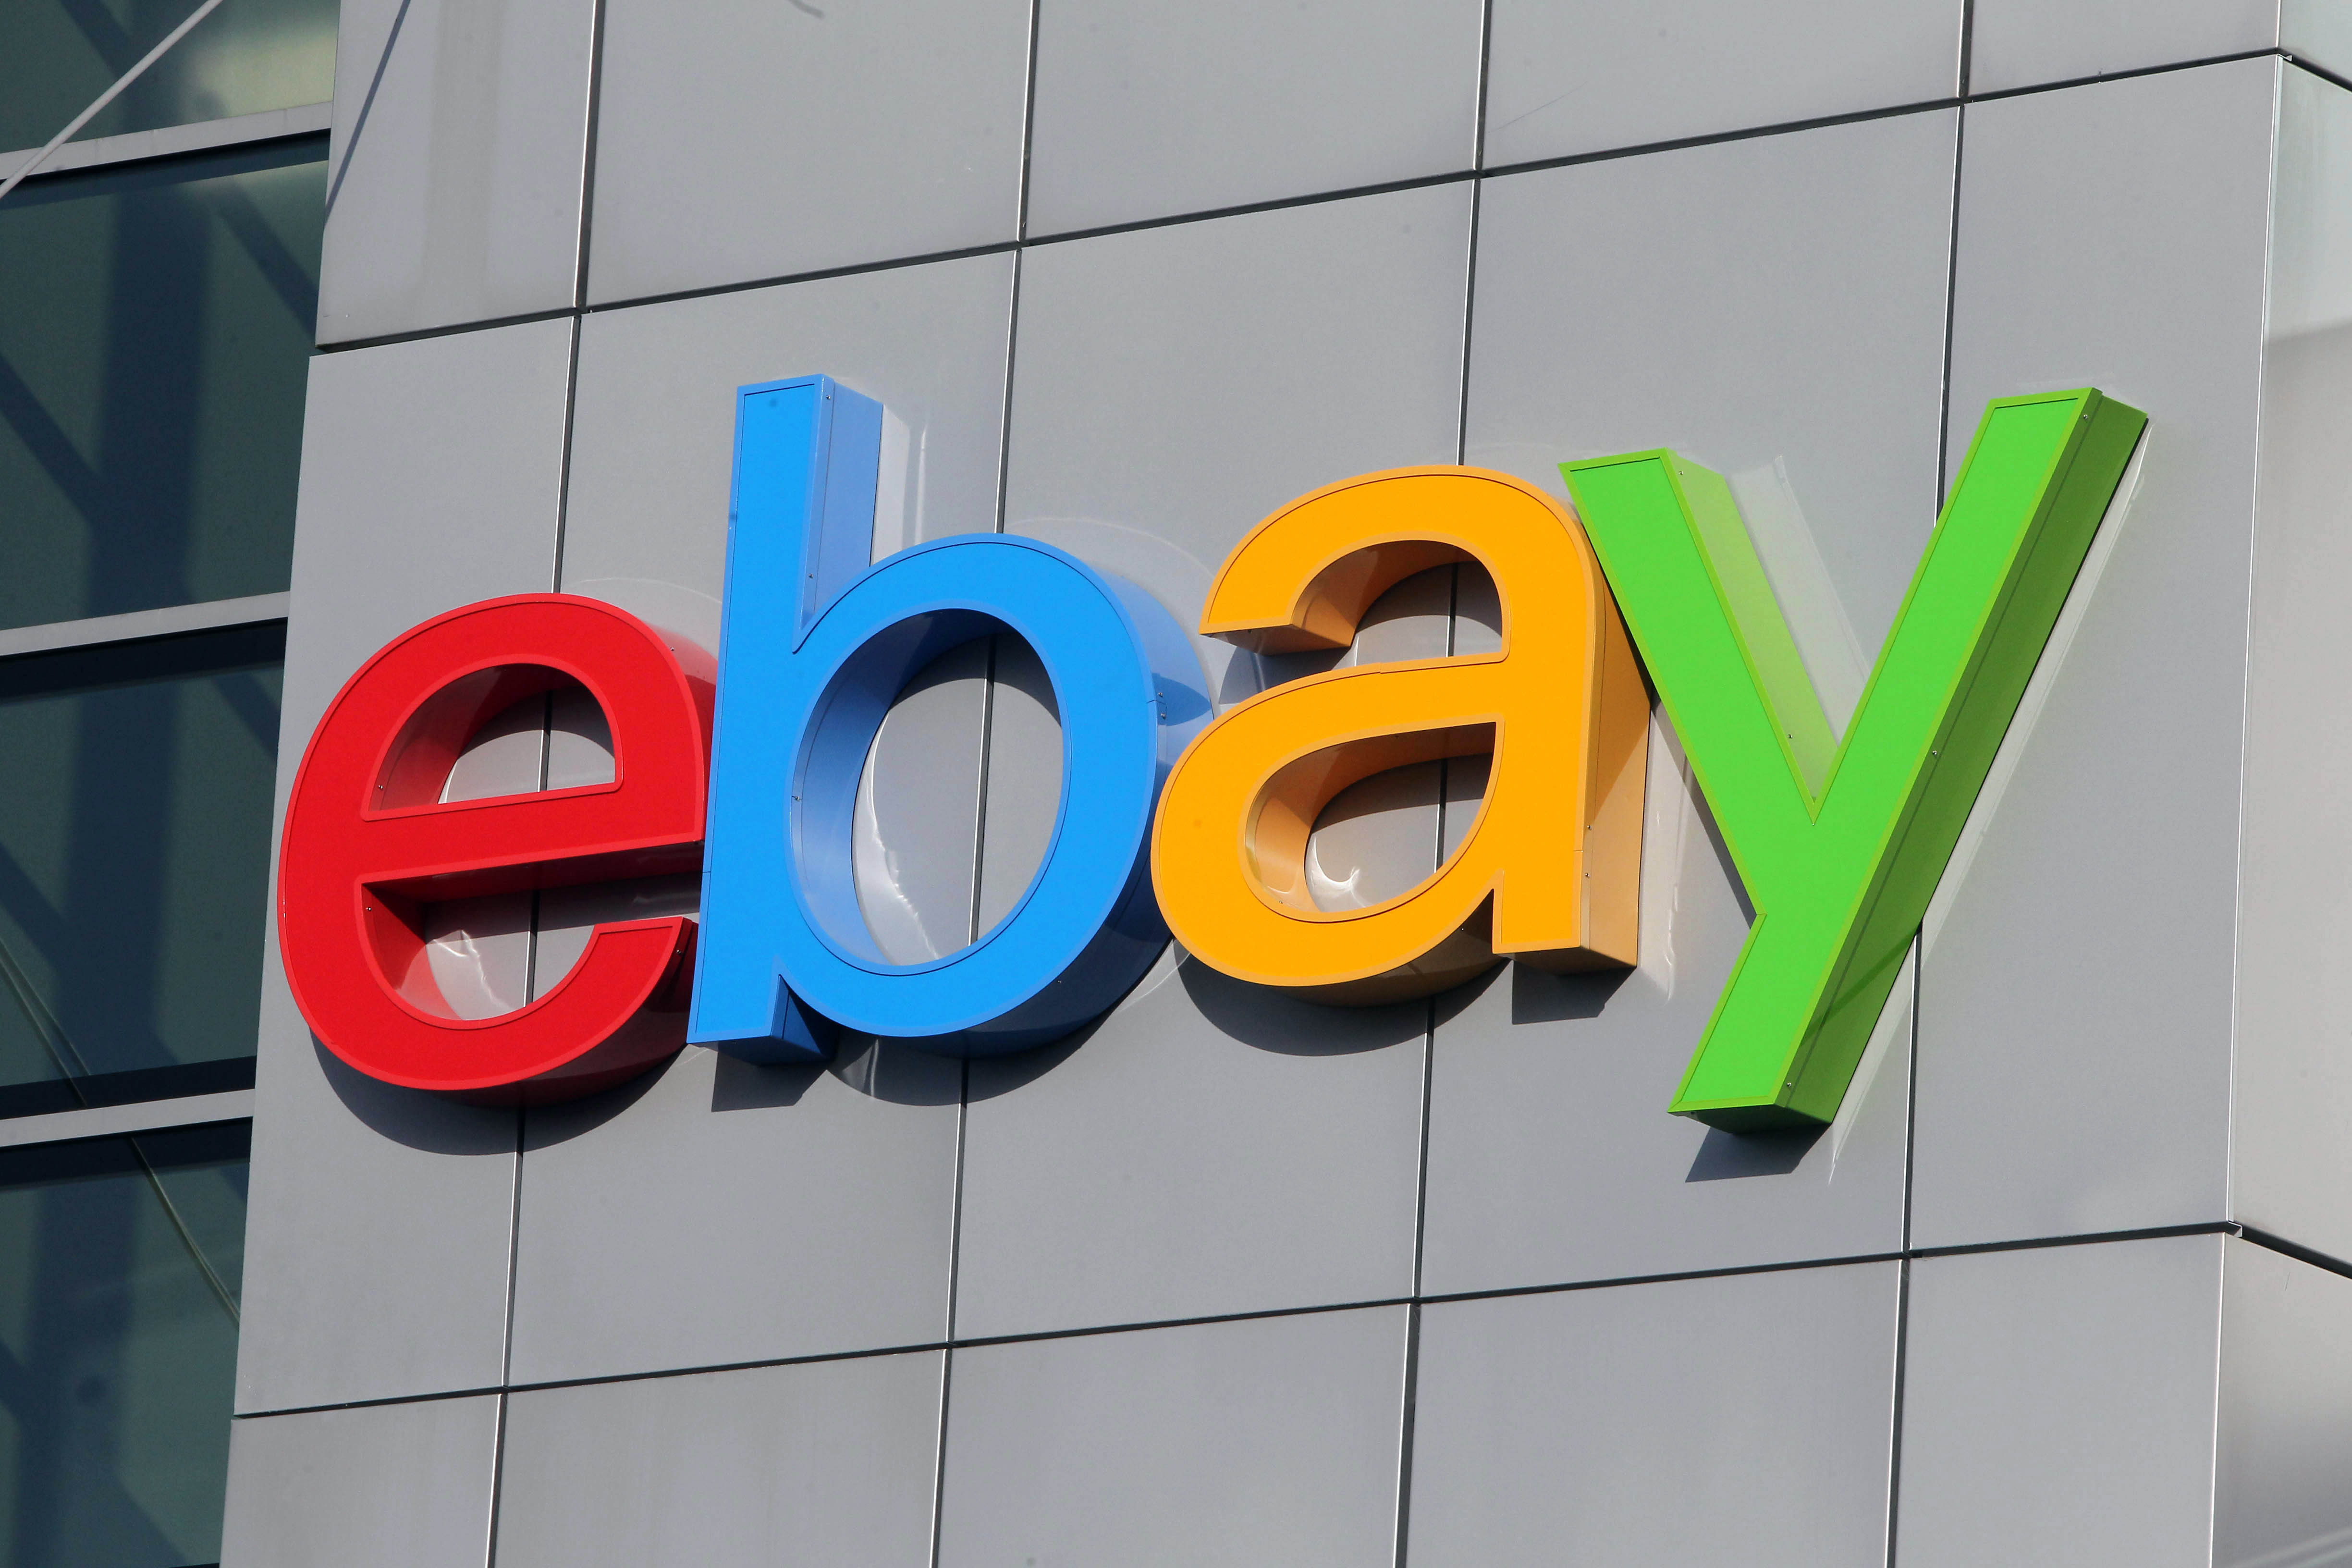 eBay DOWN - Fury as auction not working across the UK | Tech | Life & Style | Express.co.uk